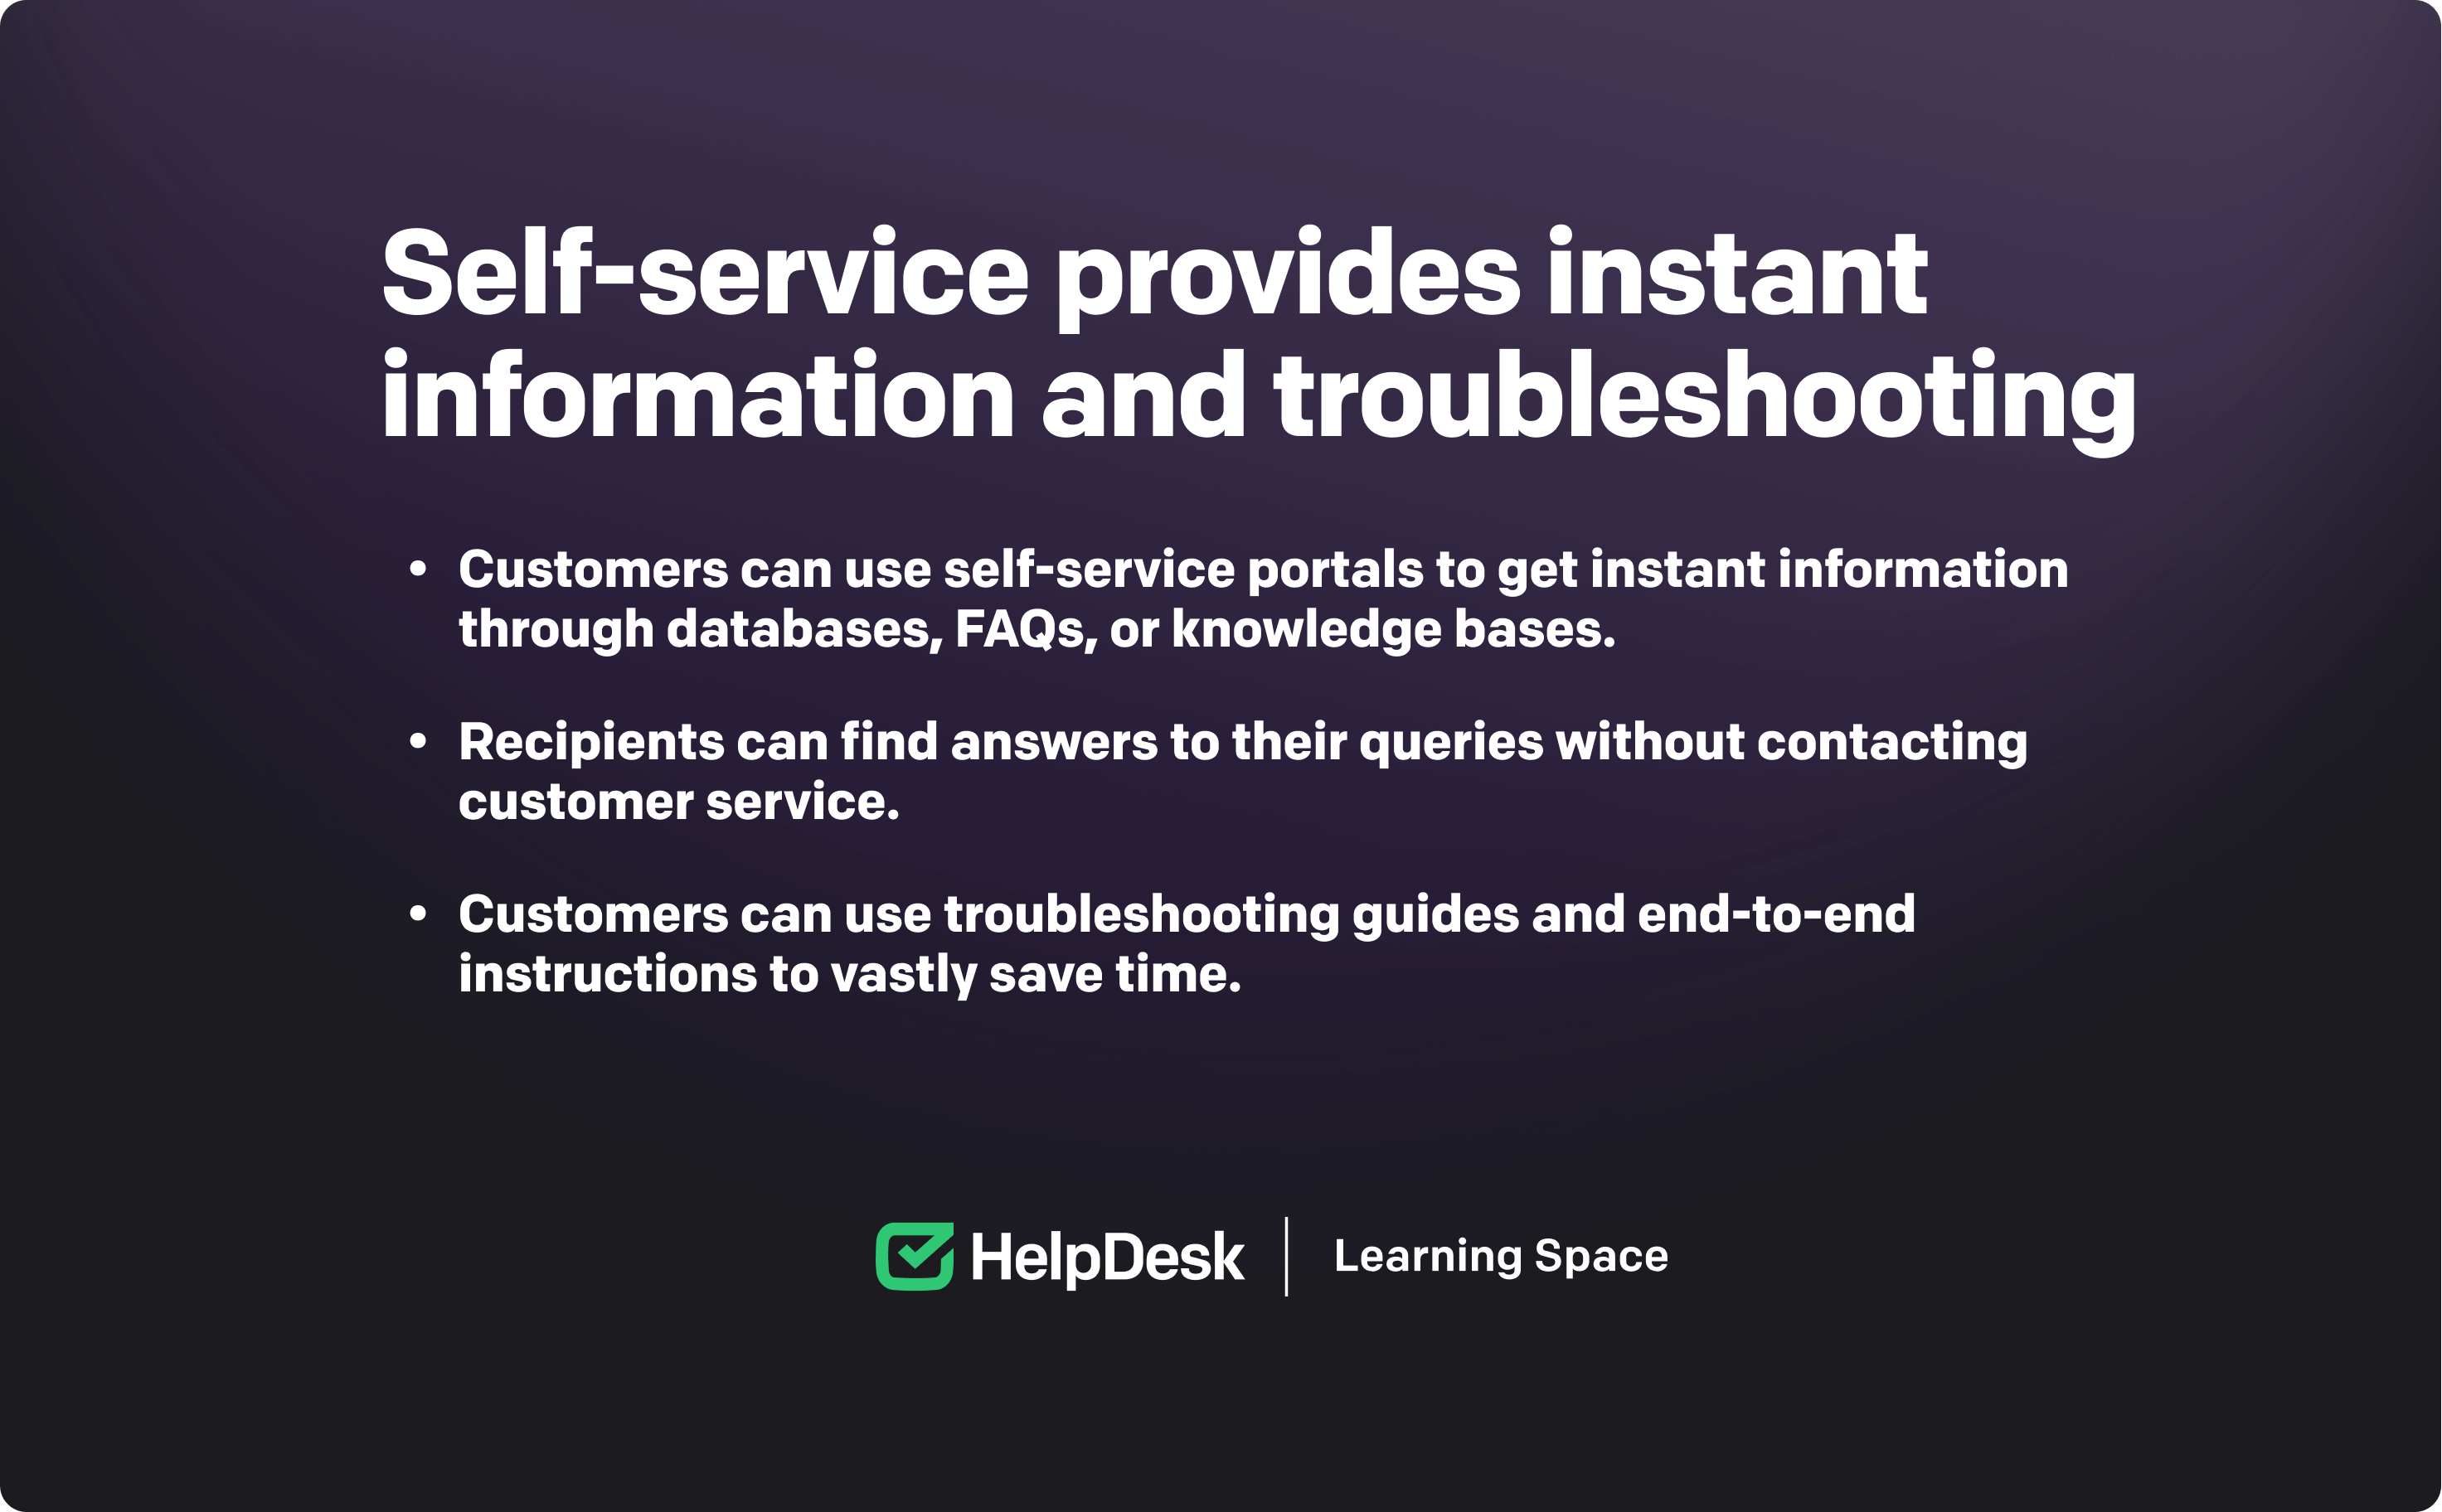 Self-service benefits for customers: instant information and troubleshooting